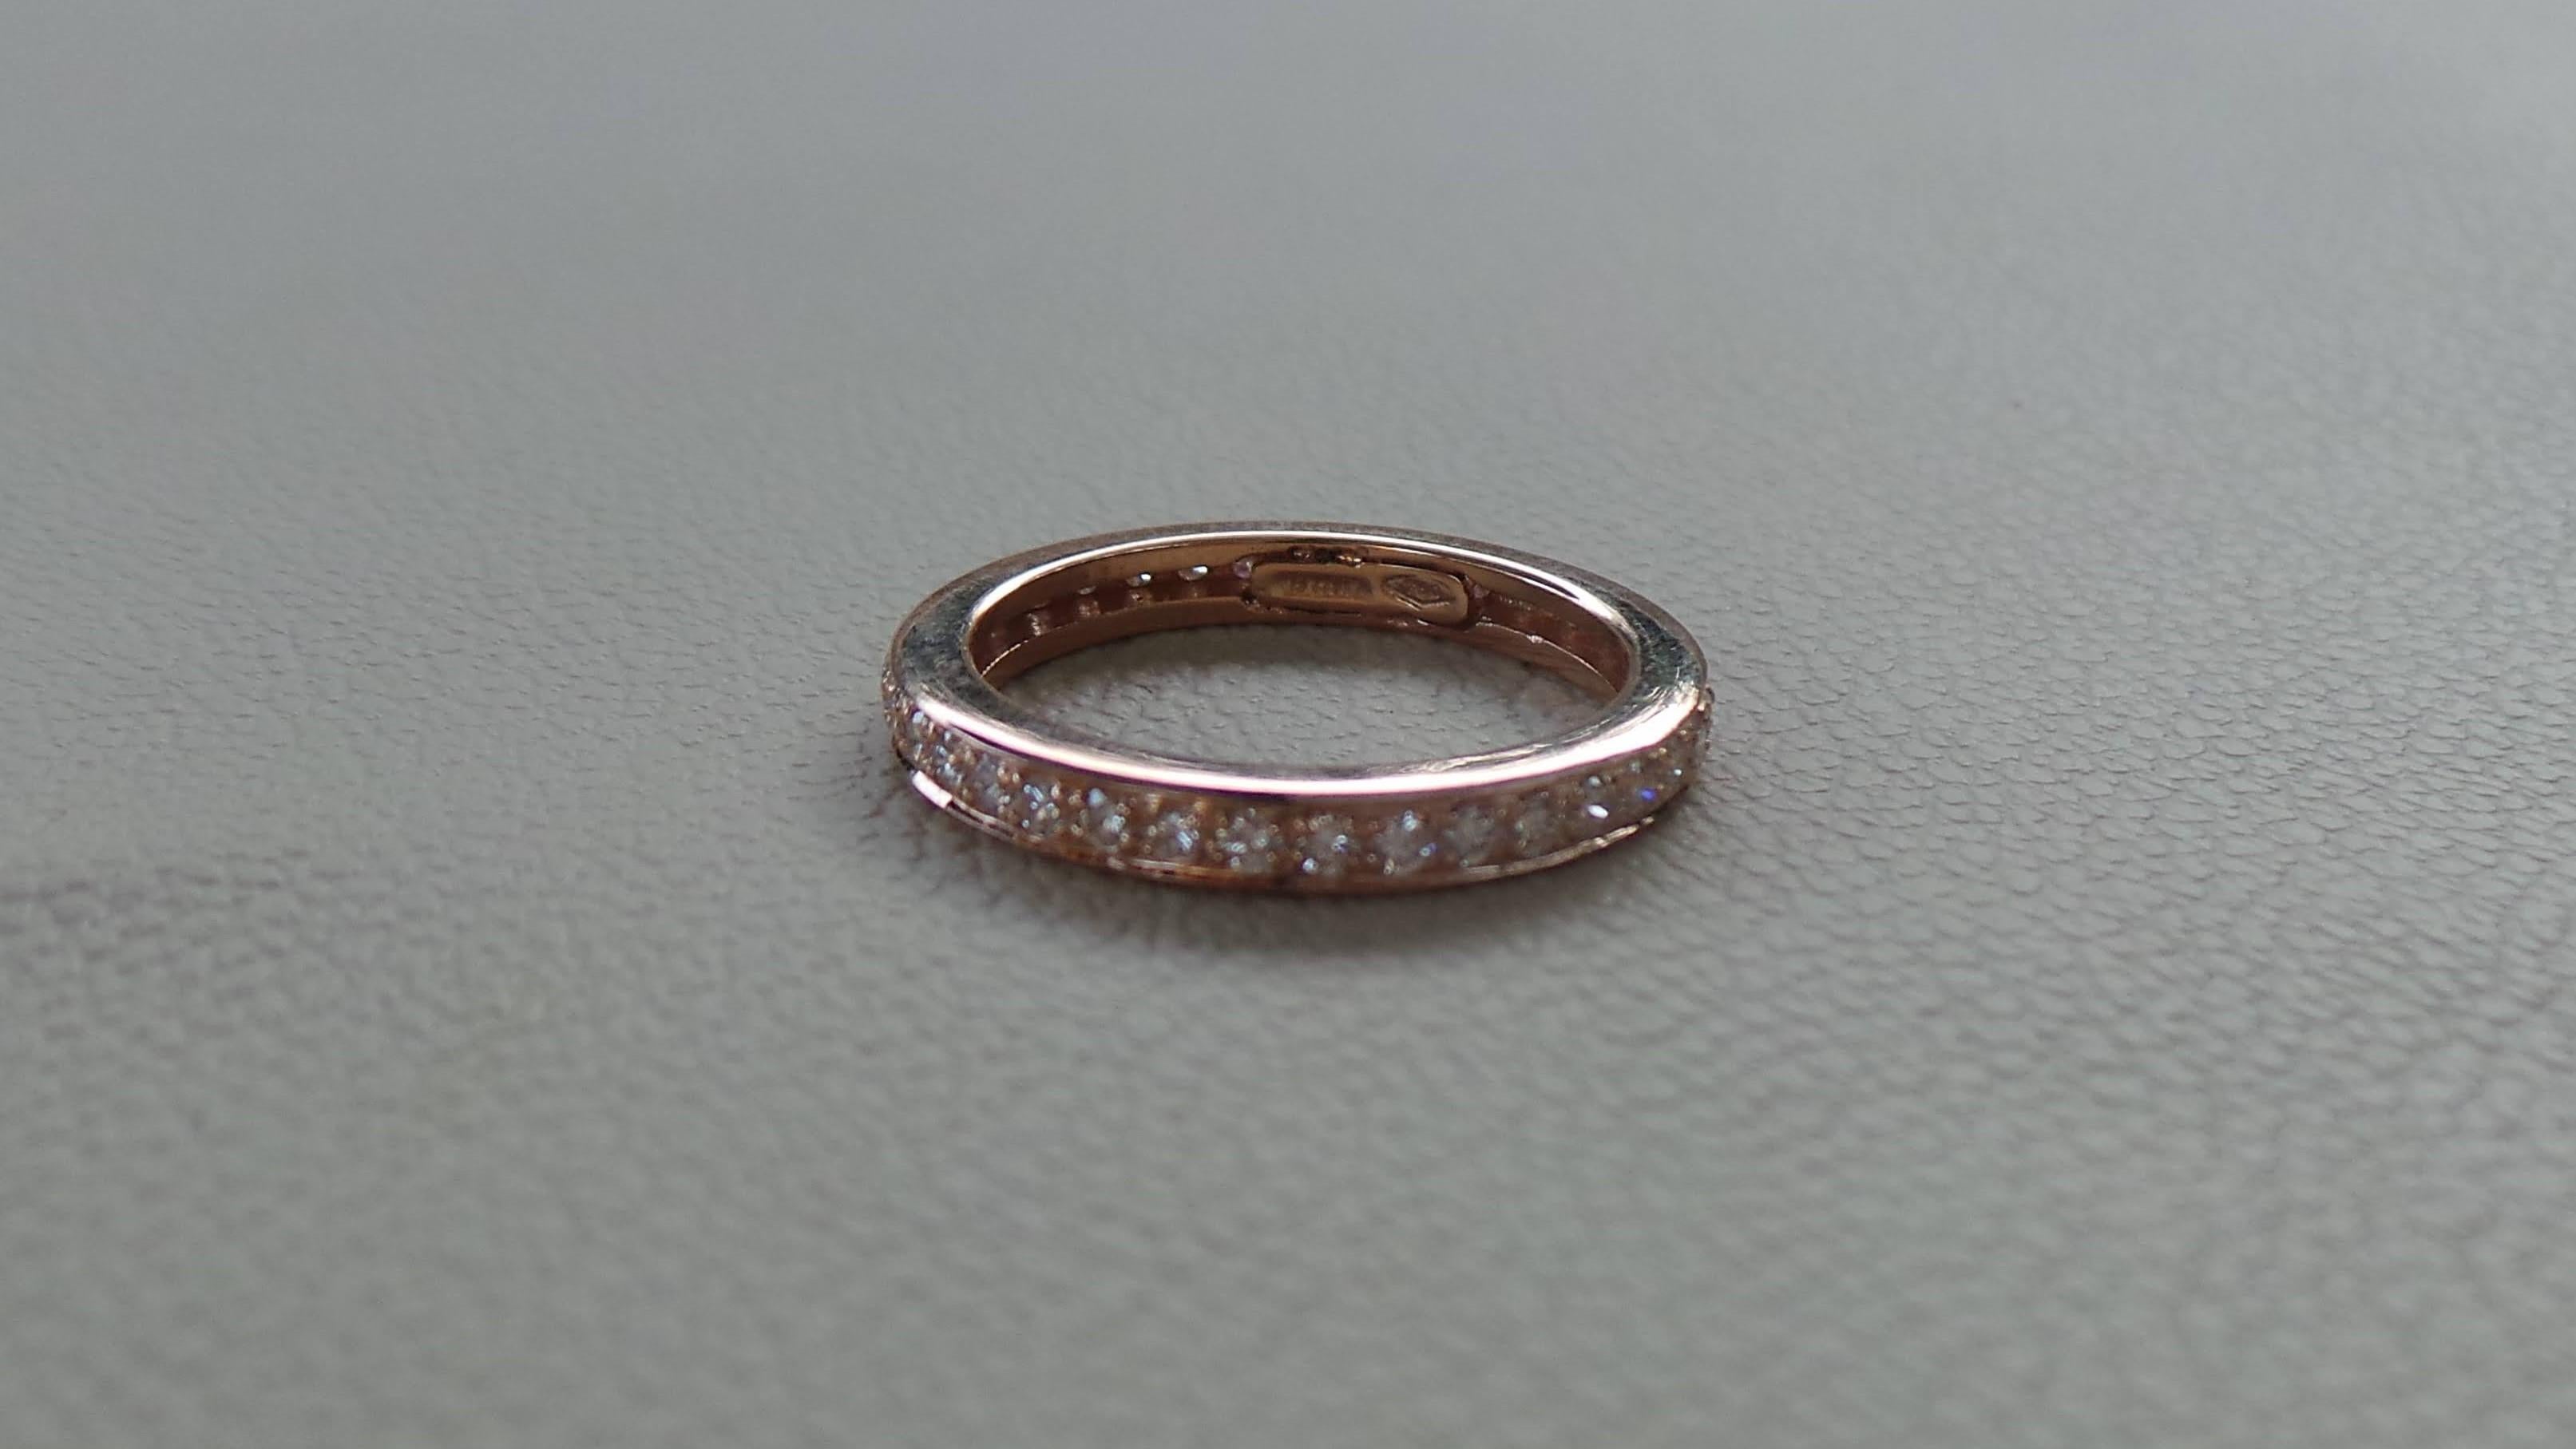 Andrea Macinai design a dedicated collection for stackable rings.  
The eternity ring has diamonds all the way around the band.
Round diamonds cut brillant total 0.45 carats.
We're a workshop so every piece is handmade, customizable and resizable.